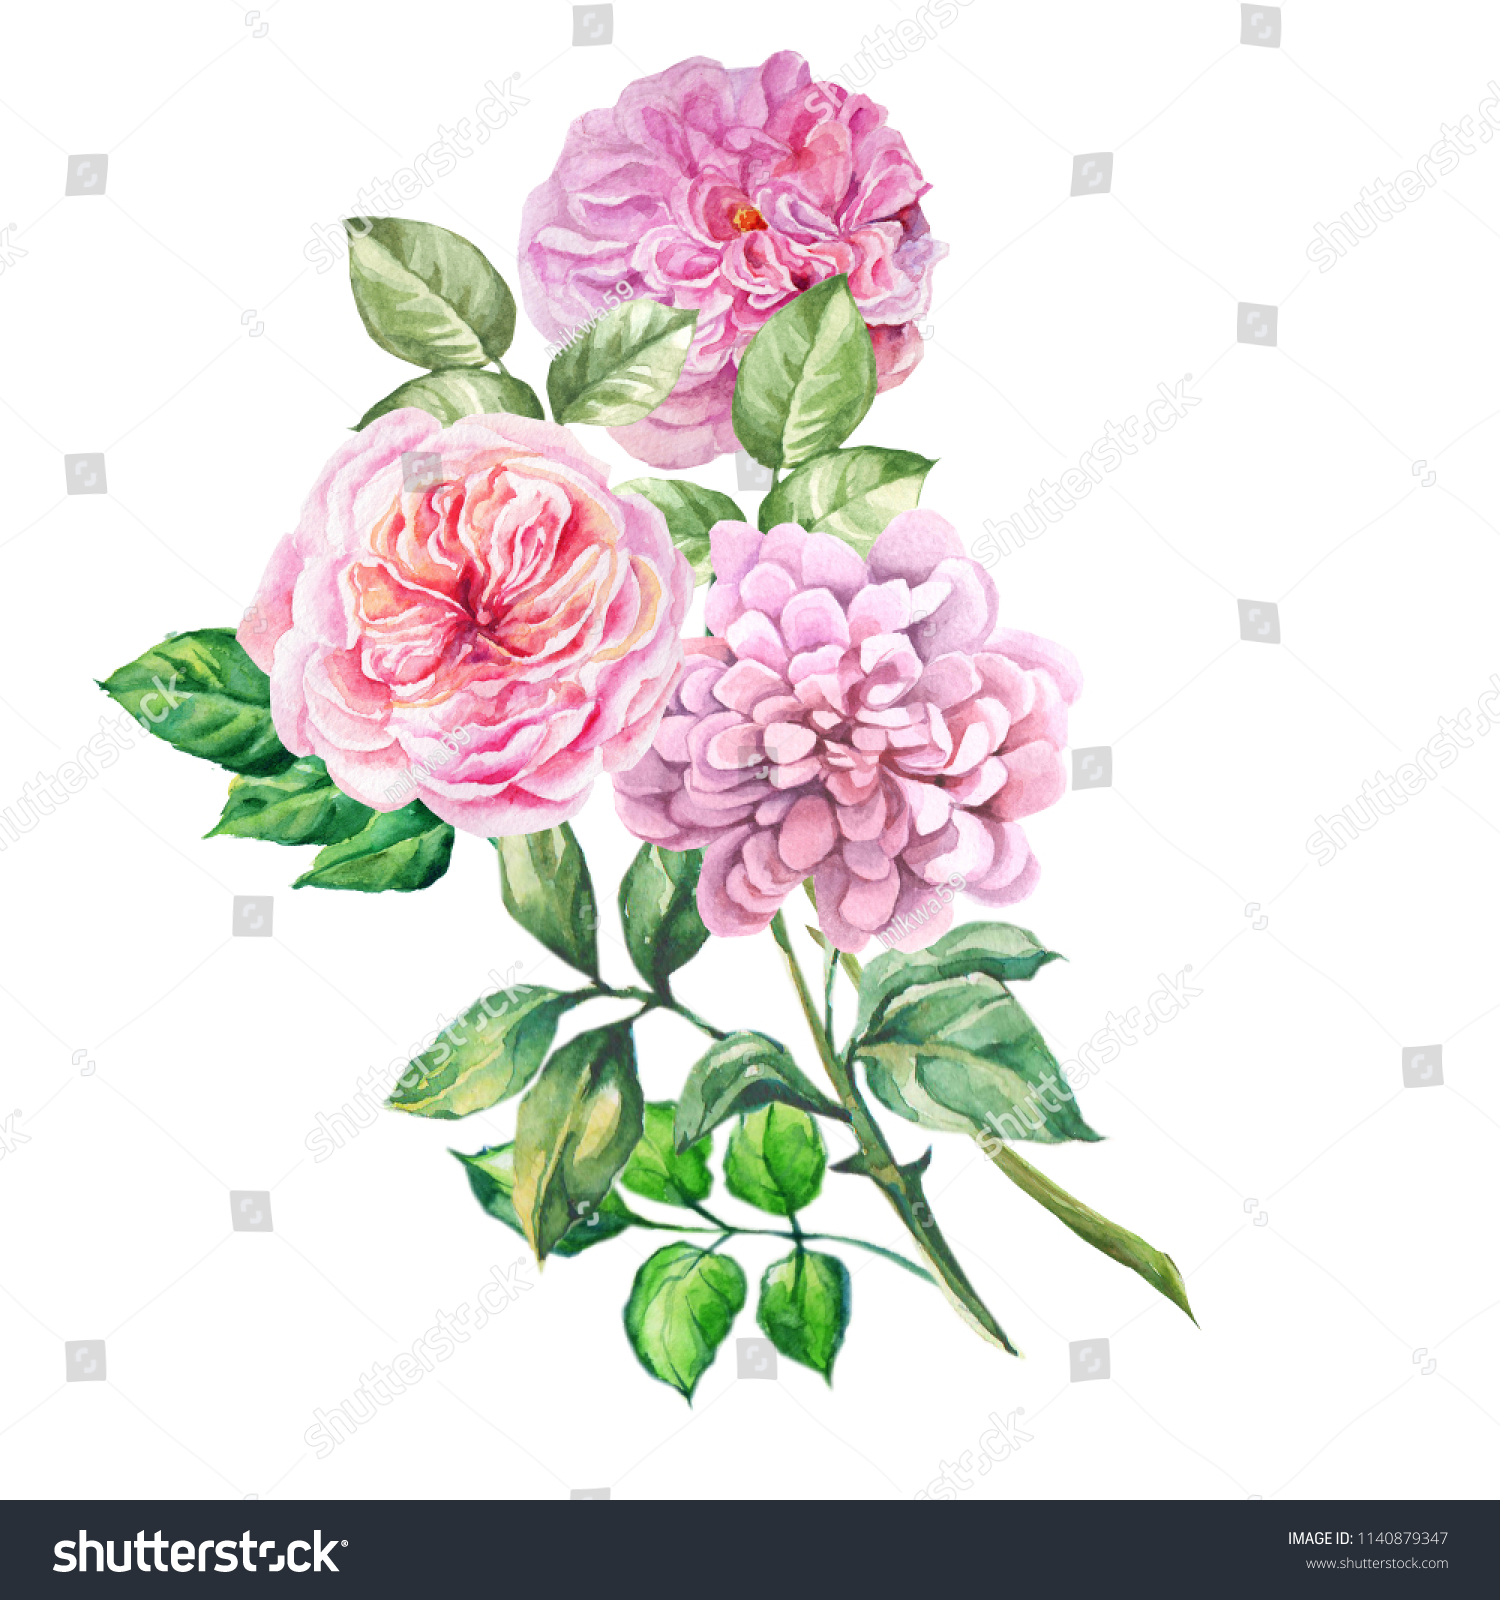 Watercolor Bouquet Pink Roseswatercolor Stock Illustration 1140879347 ...